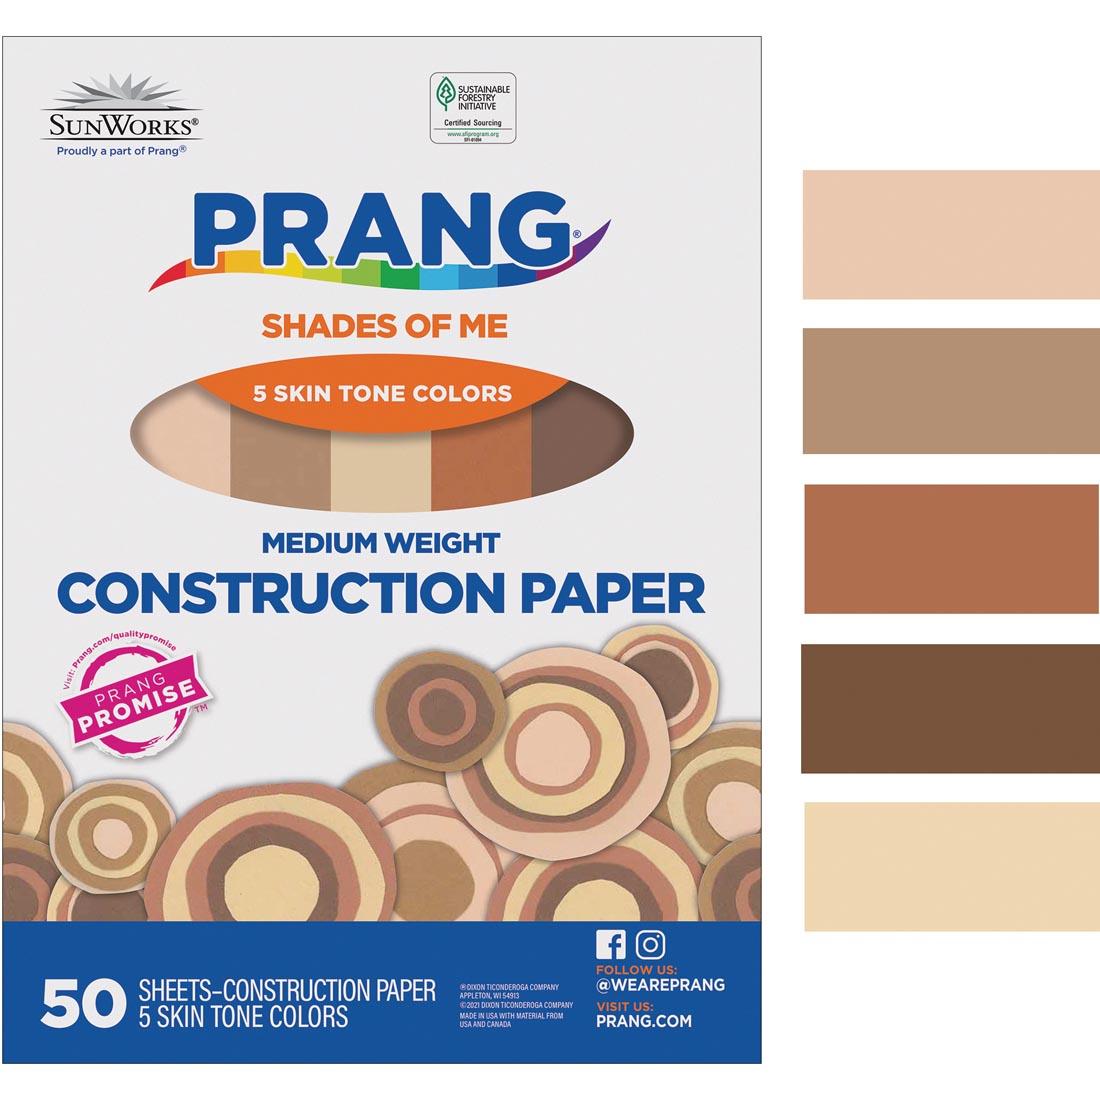 Prang Shades of Me multicultural construction paper package next to five color swatches